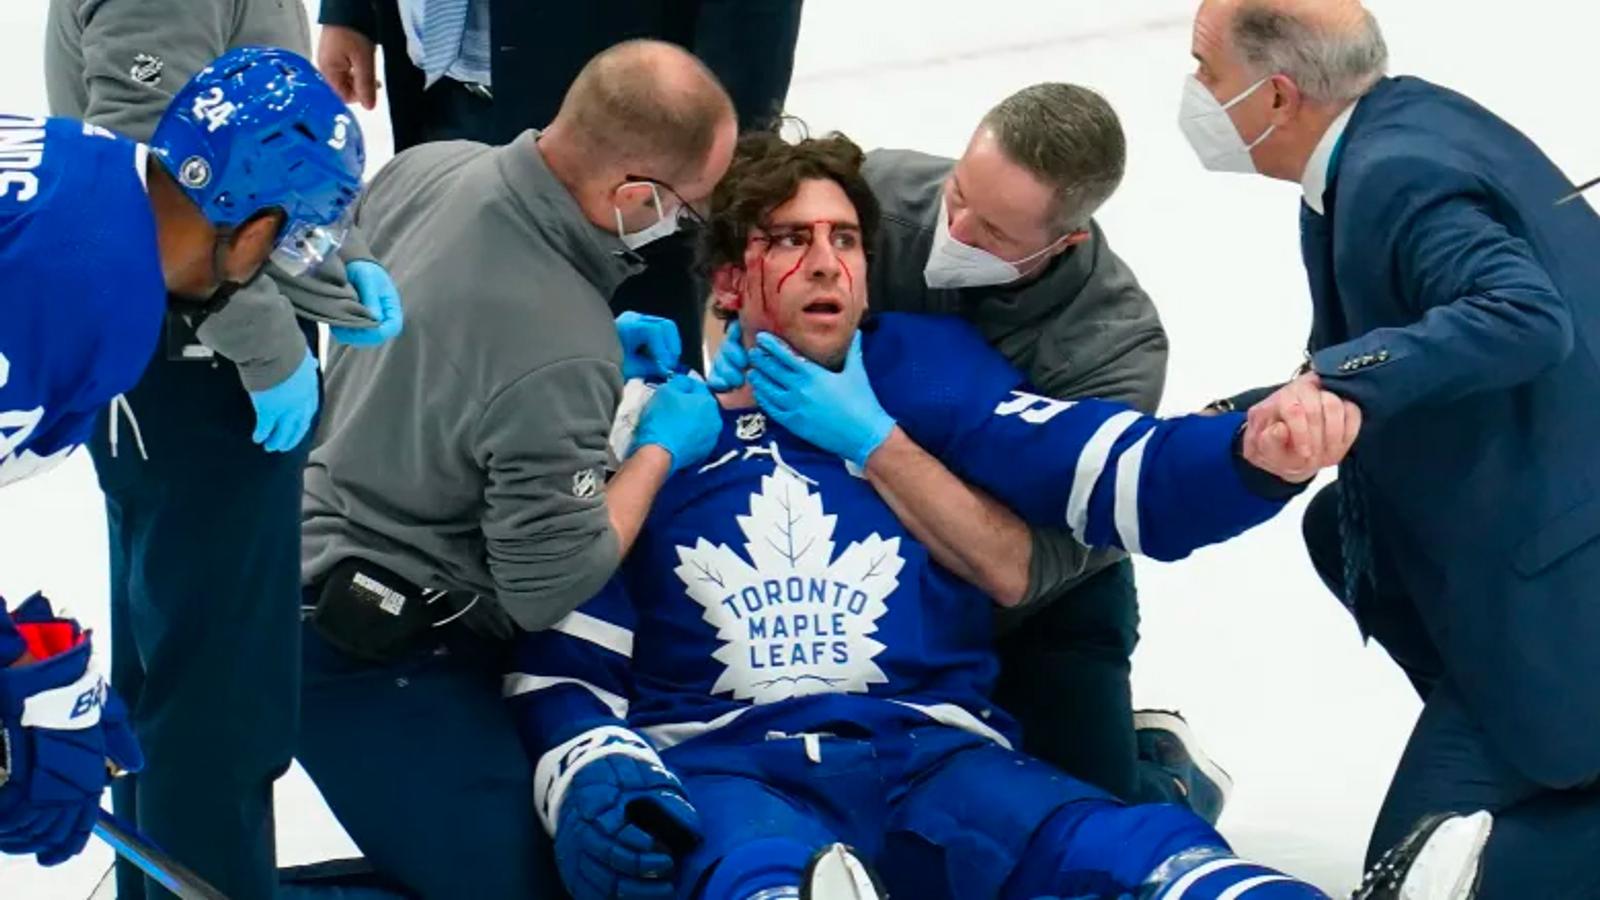 Leafs share official update on Tavares and assessment by neurosurgical team 